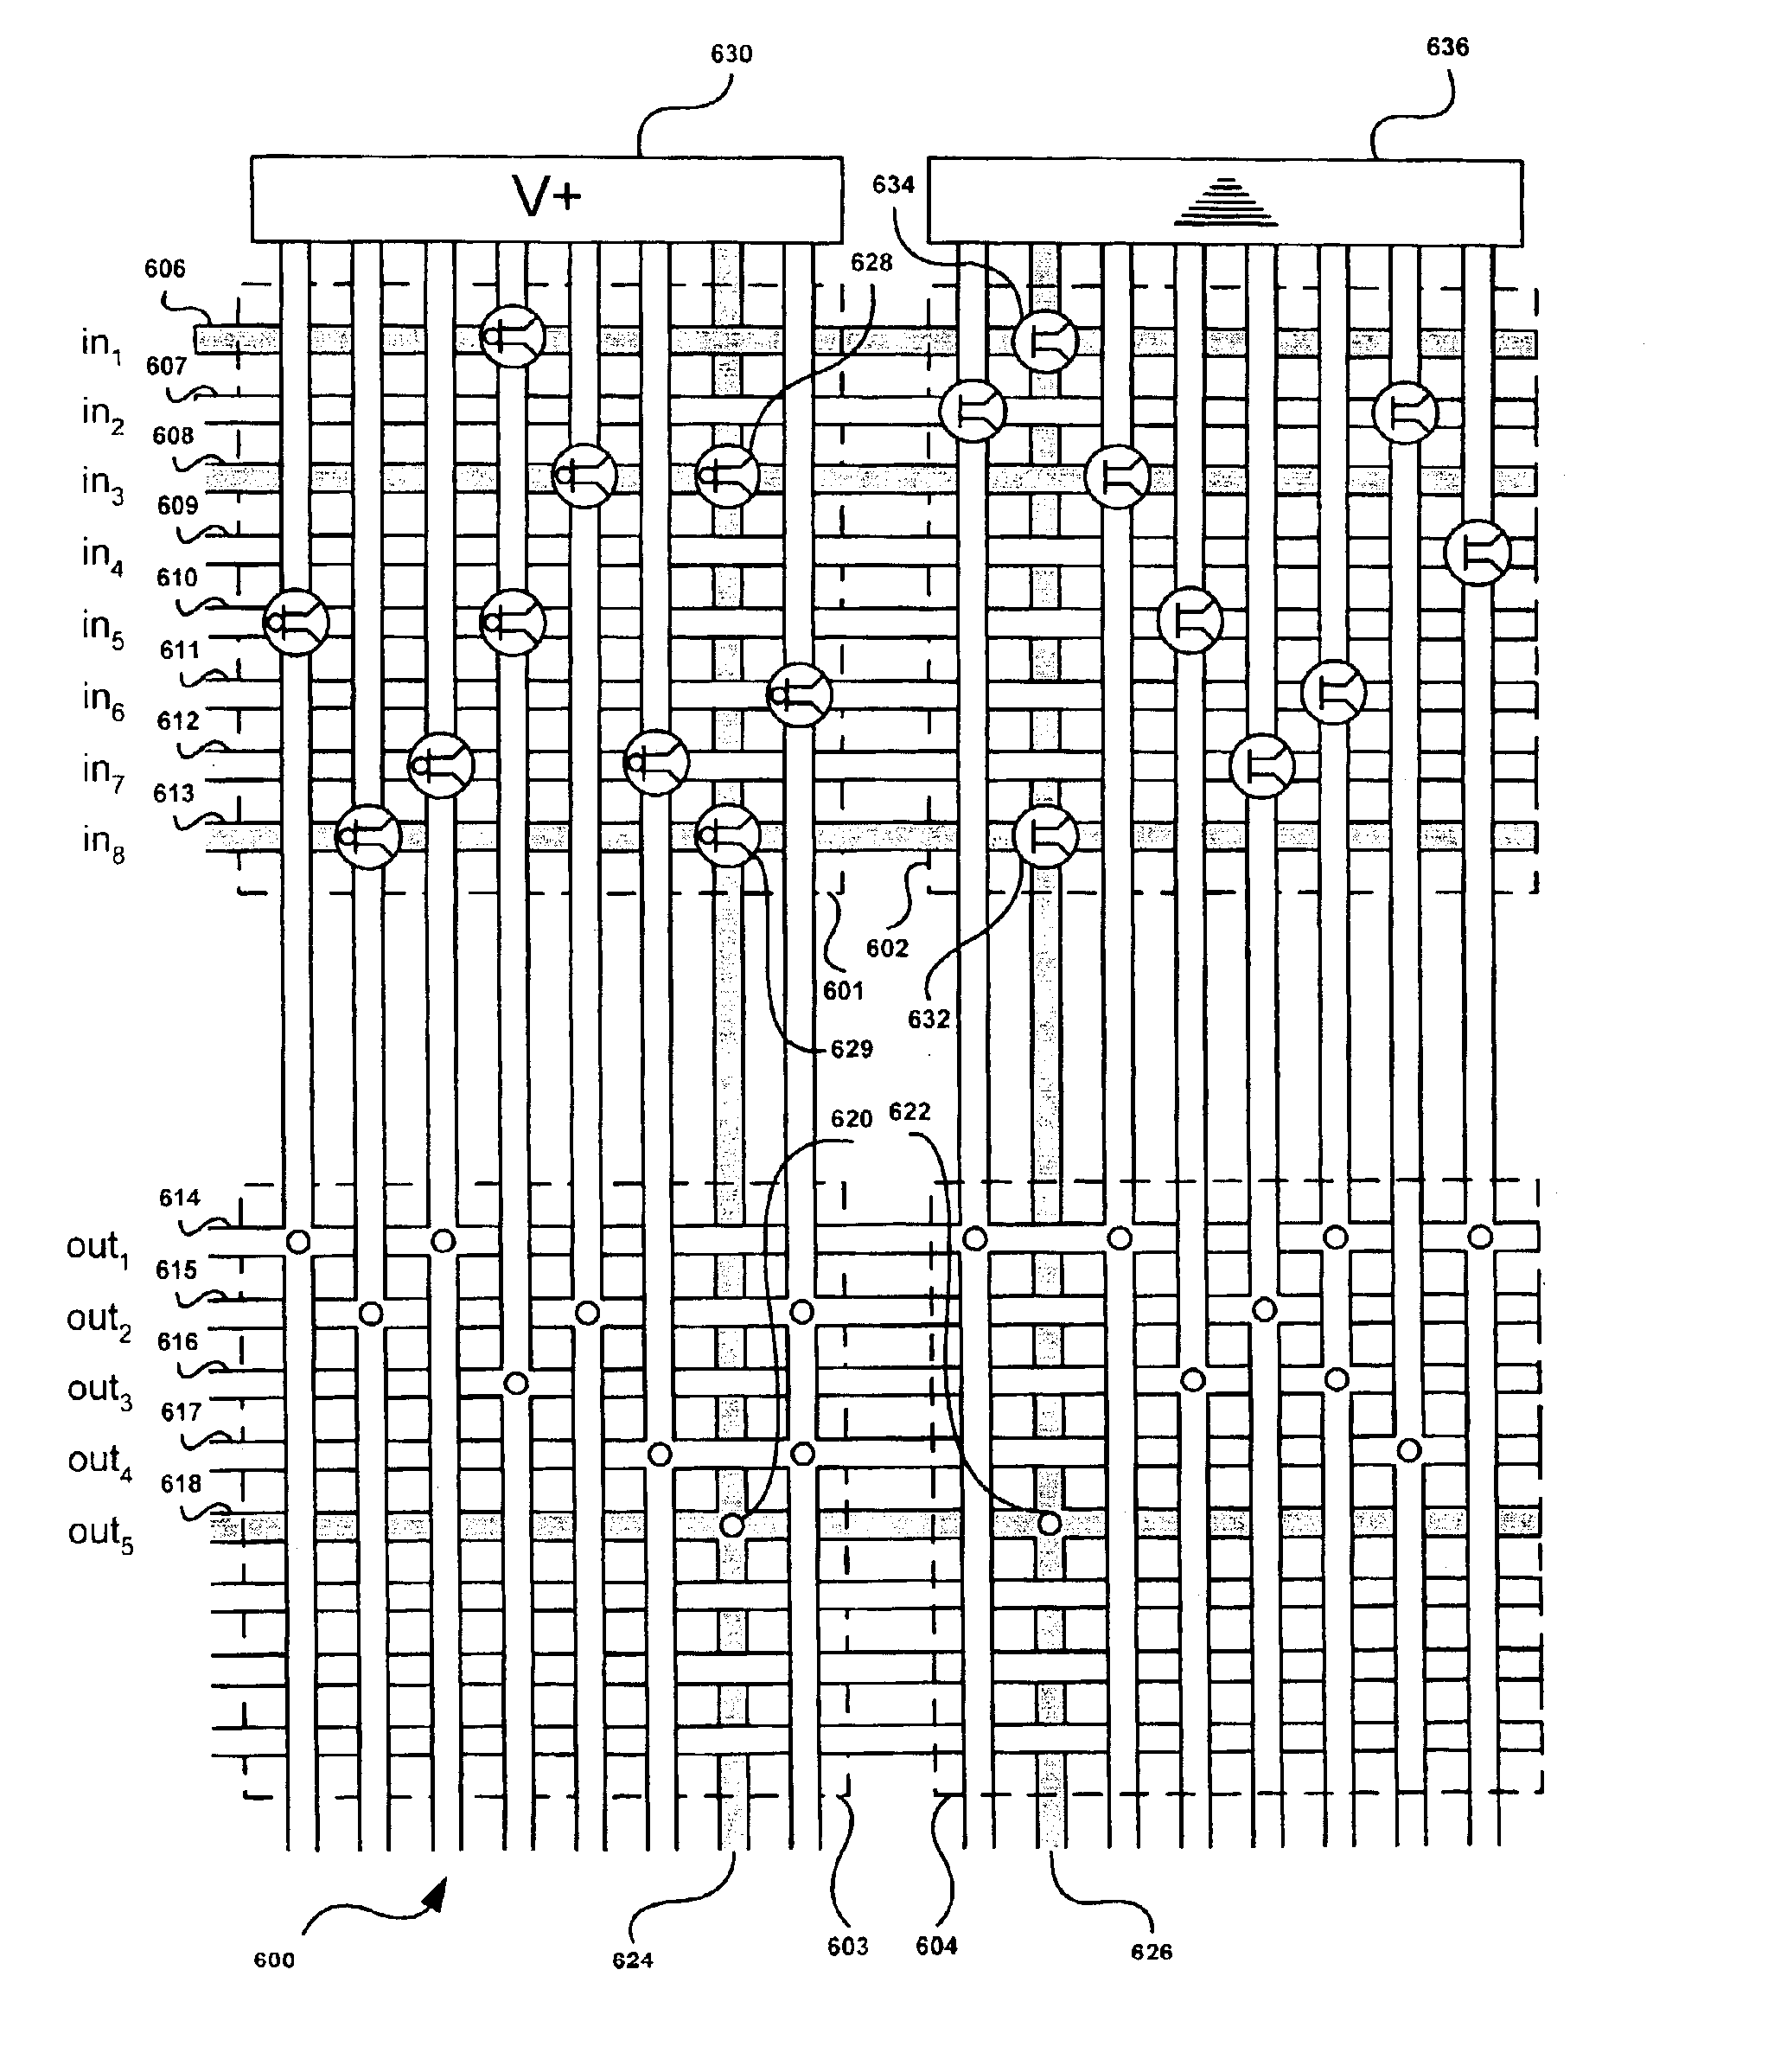 Molecular-wire-based restorative multiplexer, and method for constructing a multiplexer based on a configurable, molecular-junction-nanowire crossbar